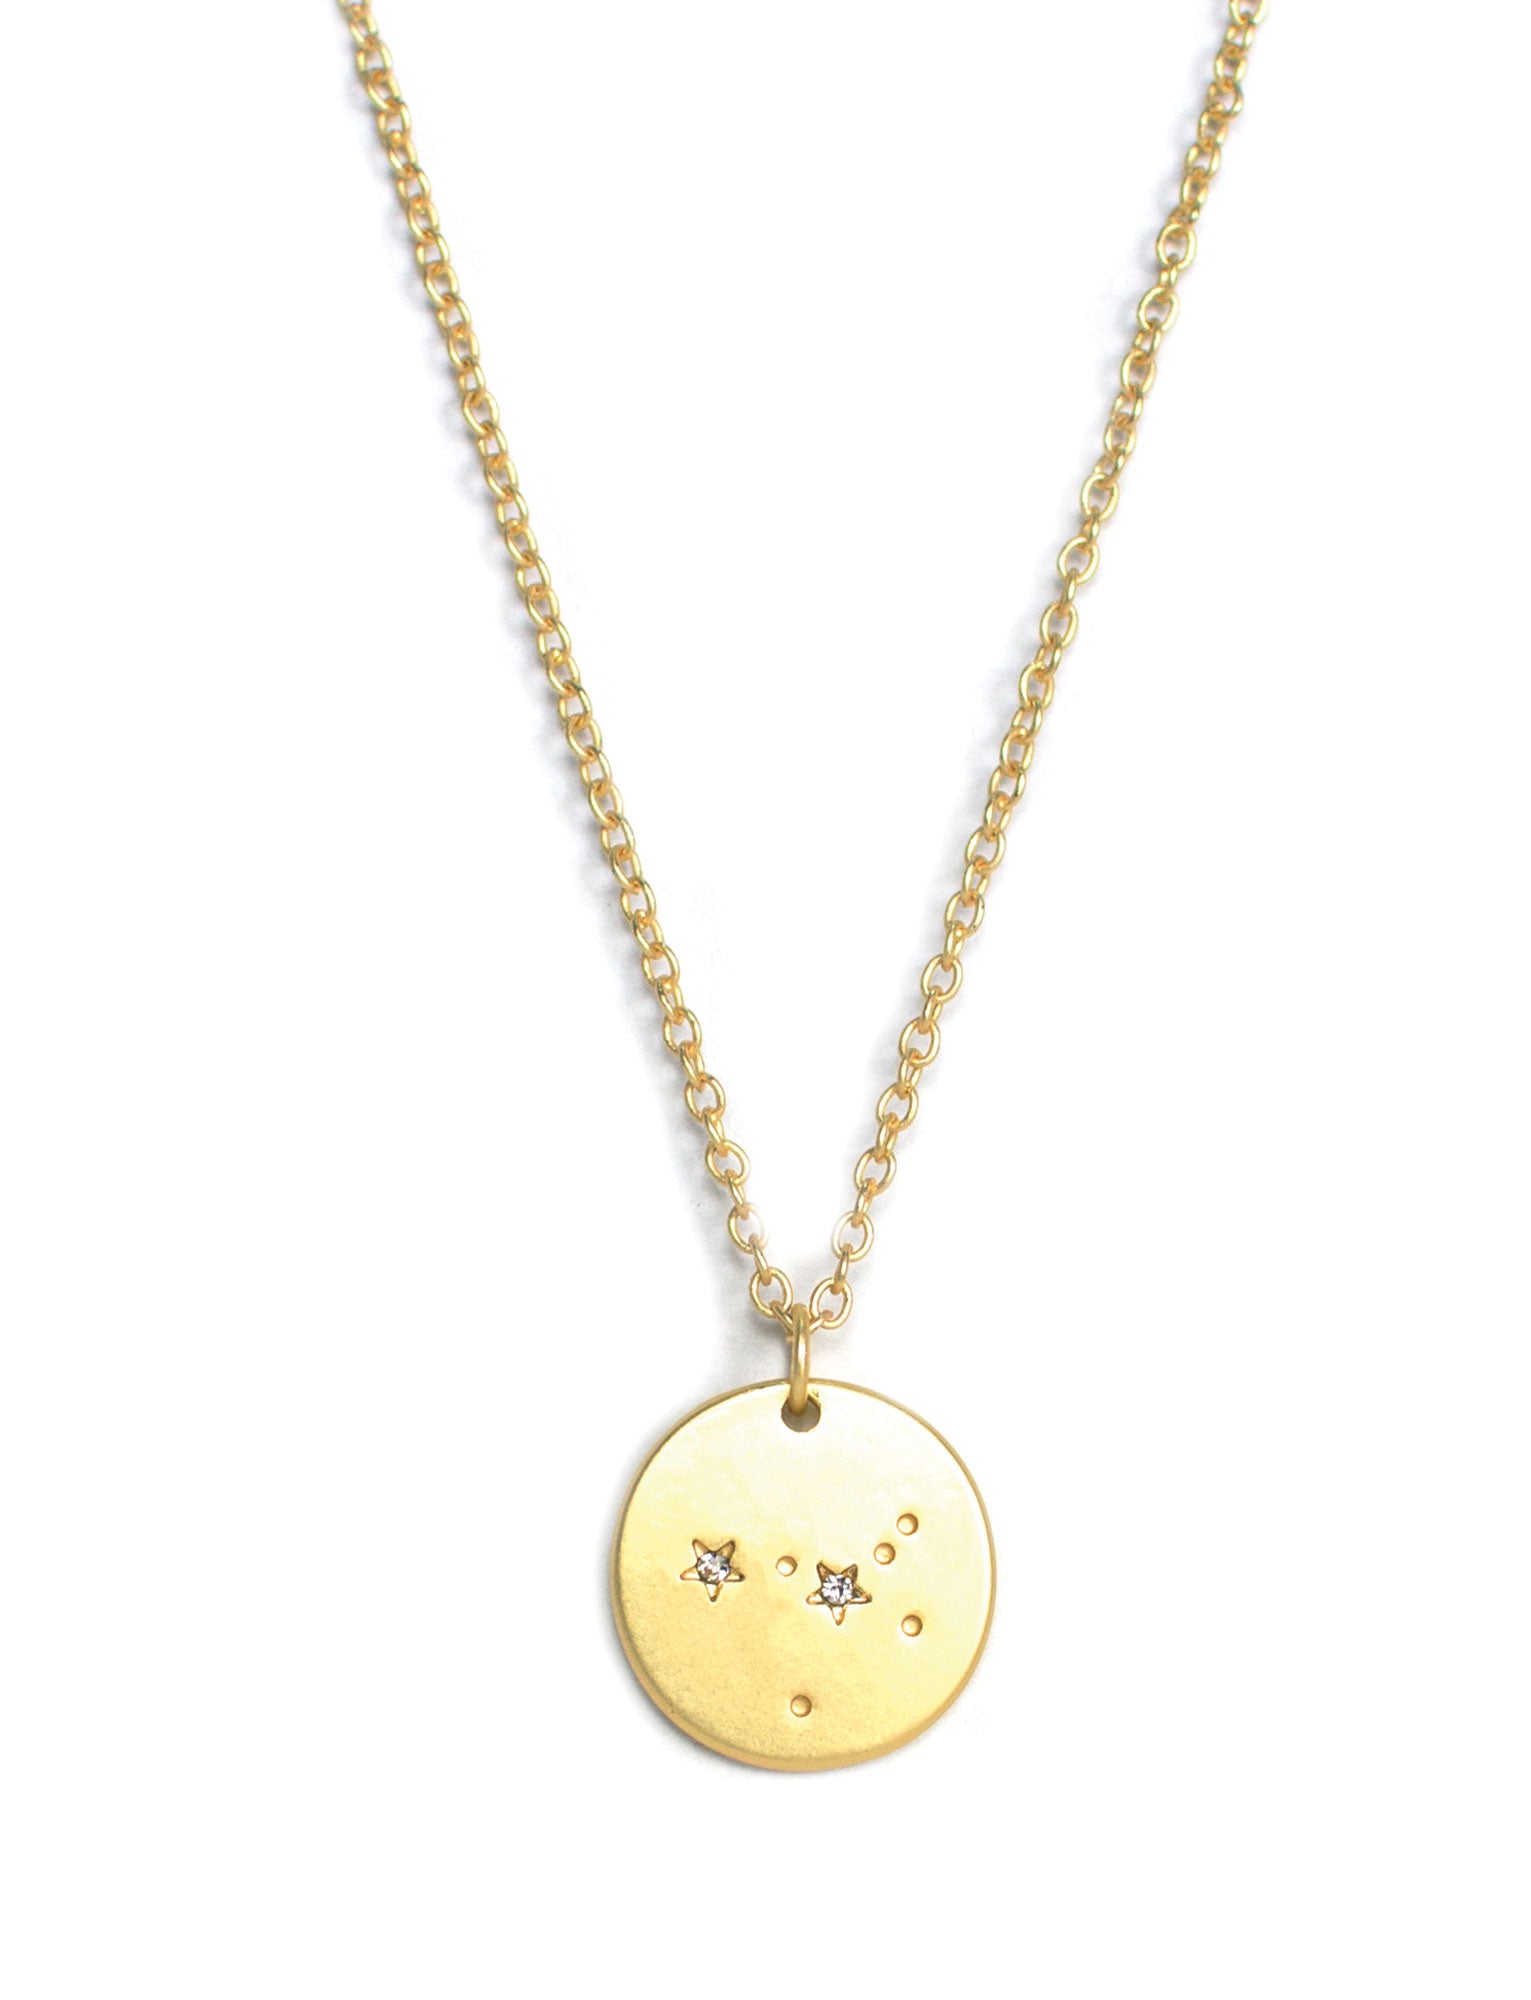 Astrology Sign Constellation Necklace